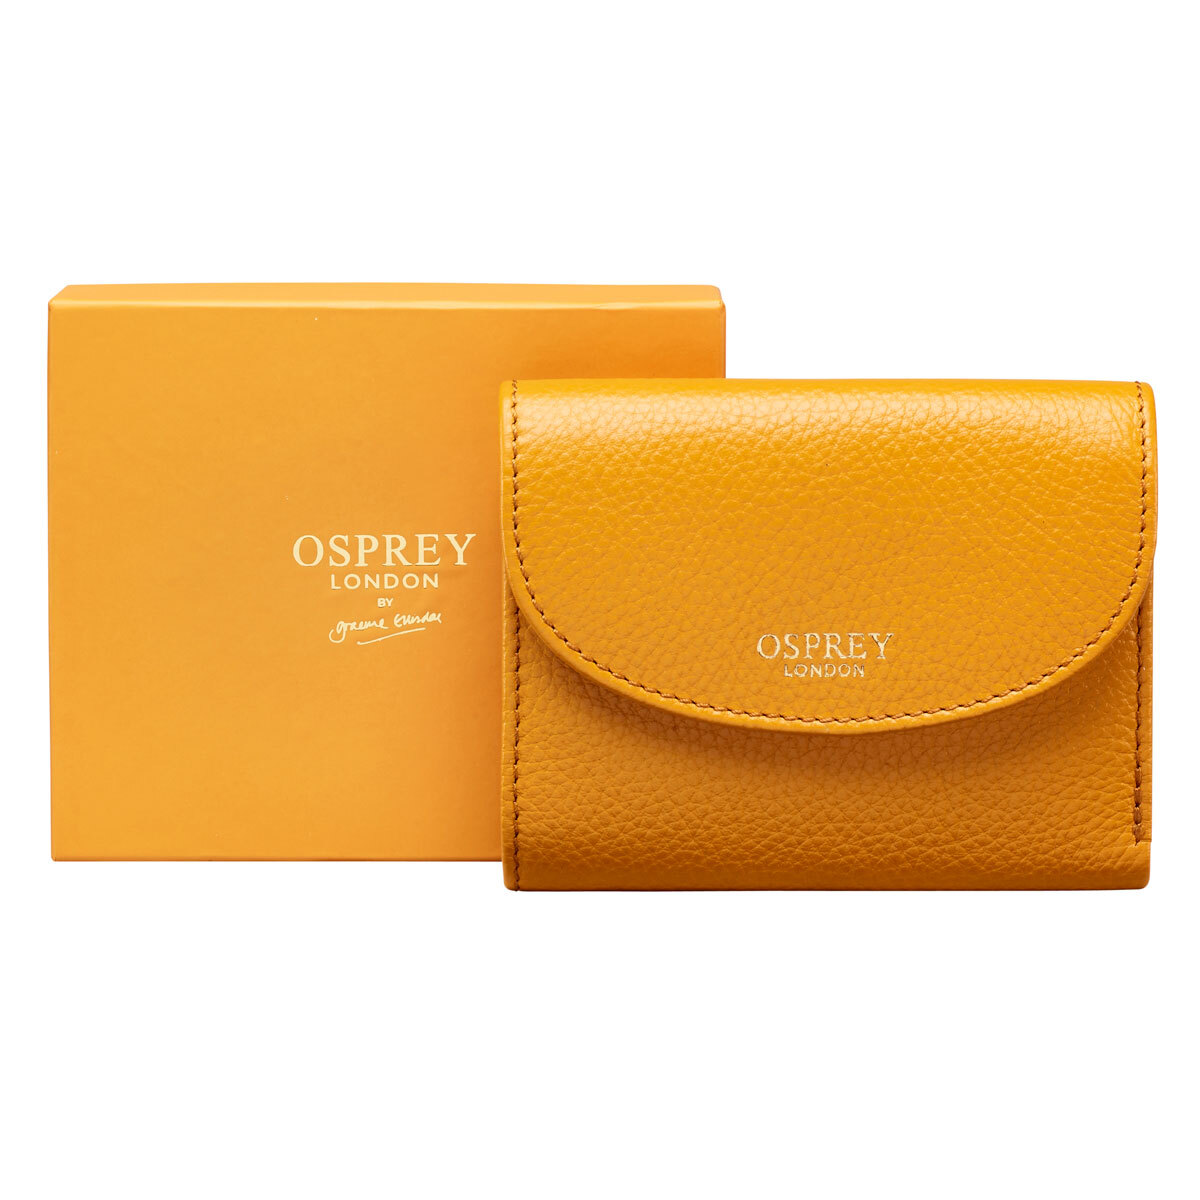 Osprey London Tilly Grainy Hide Leather Women's Purse, Mustard with Gift Box